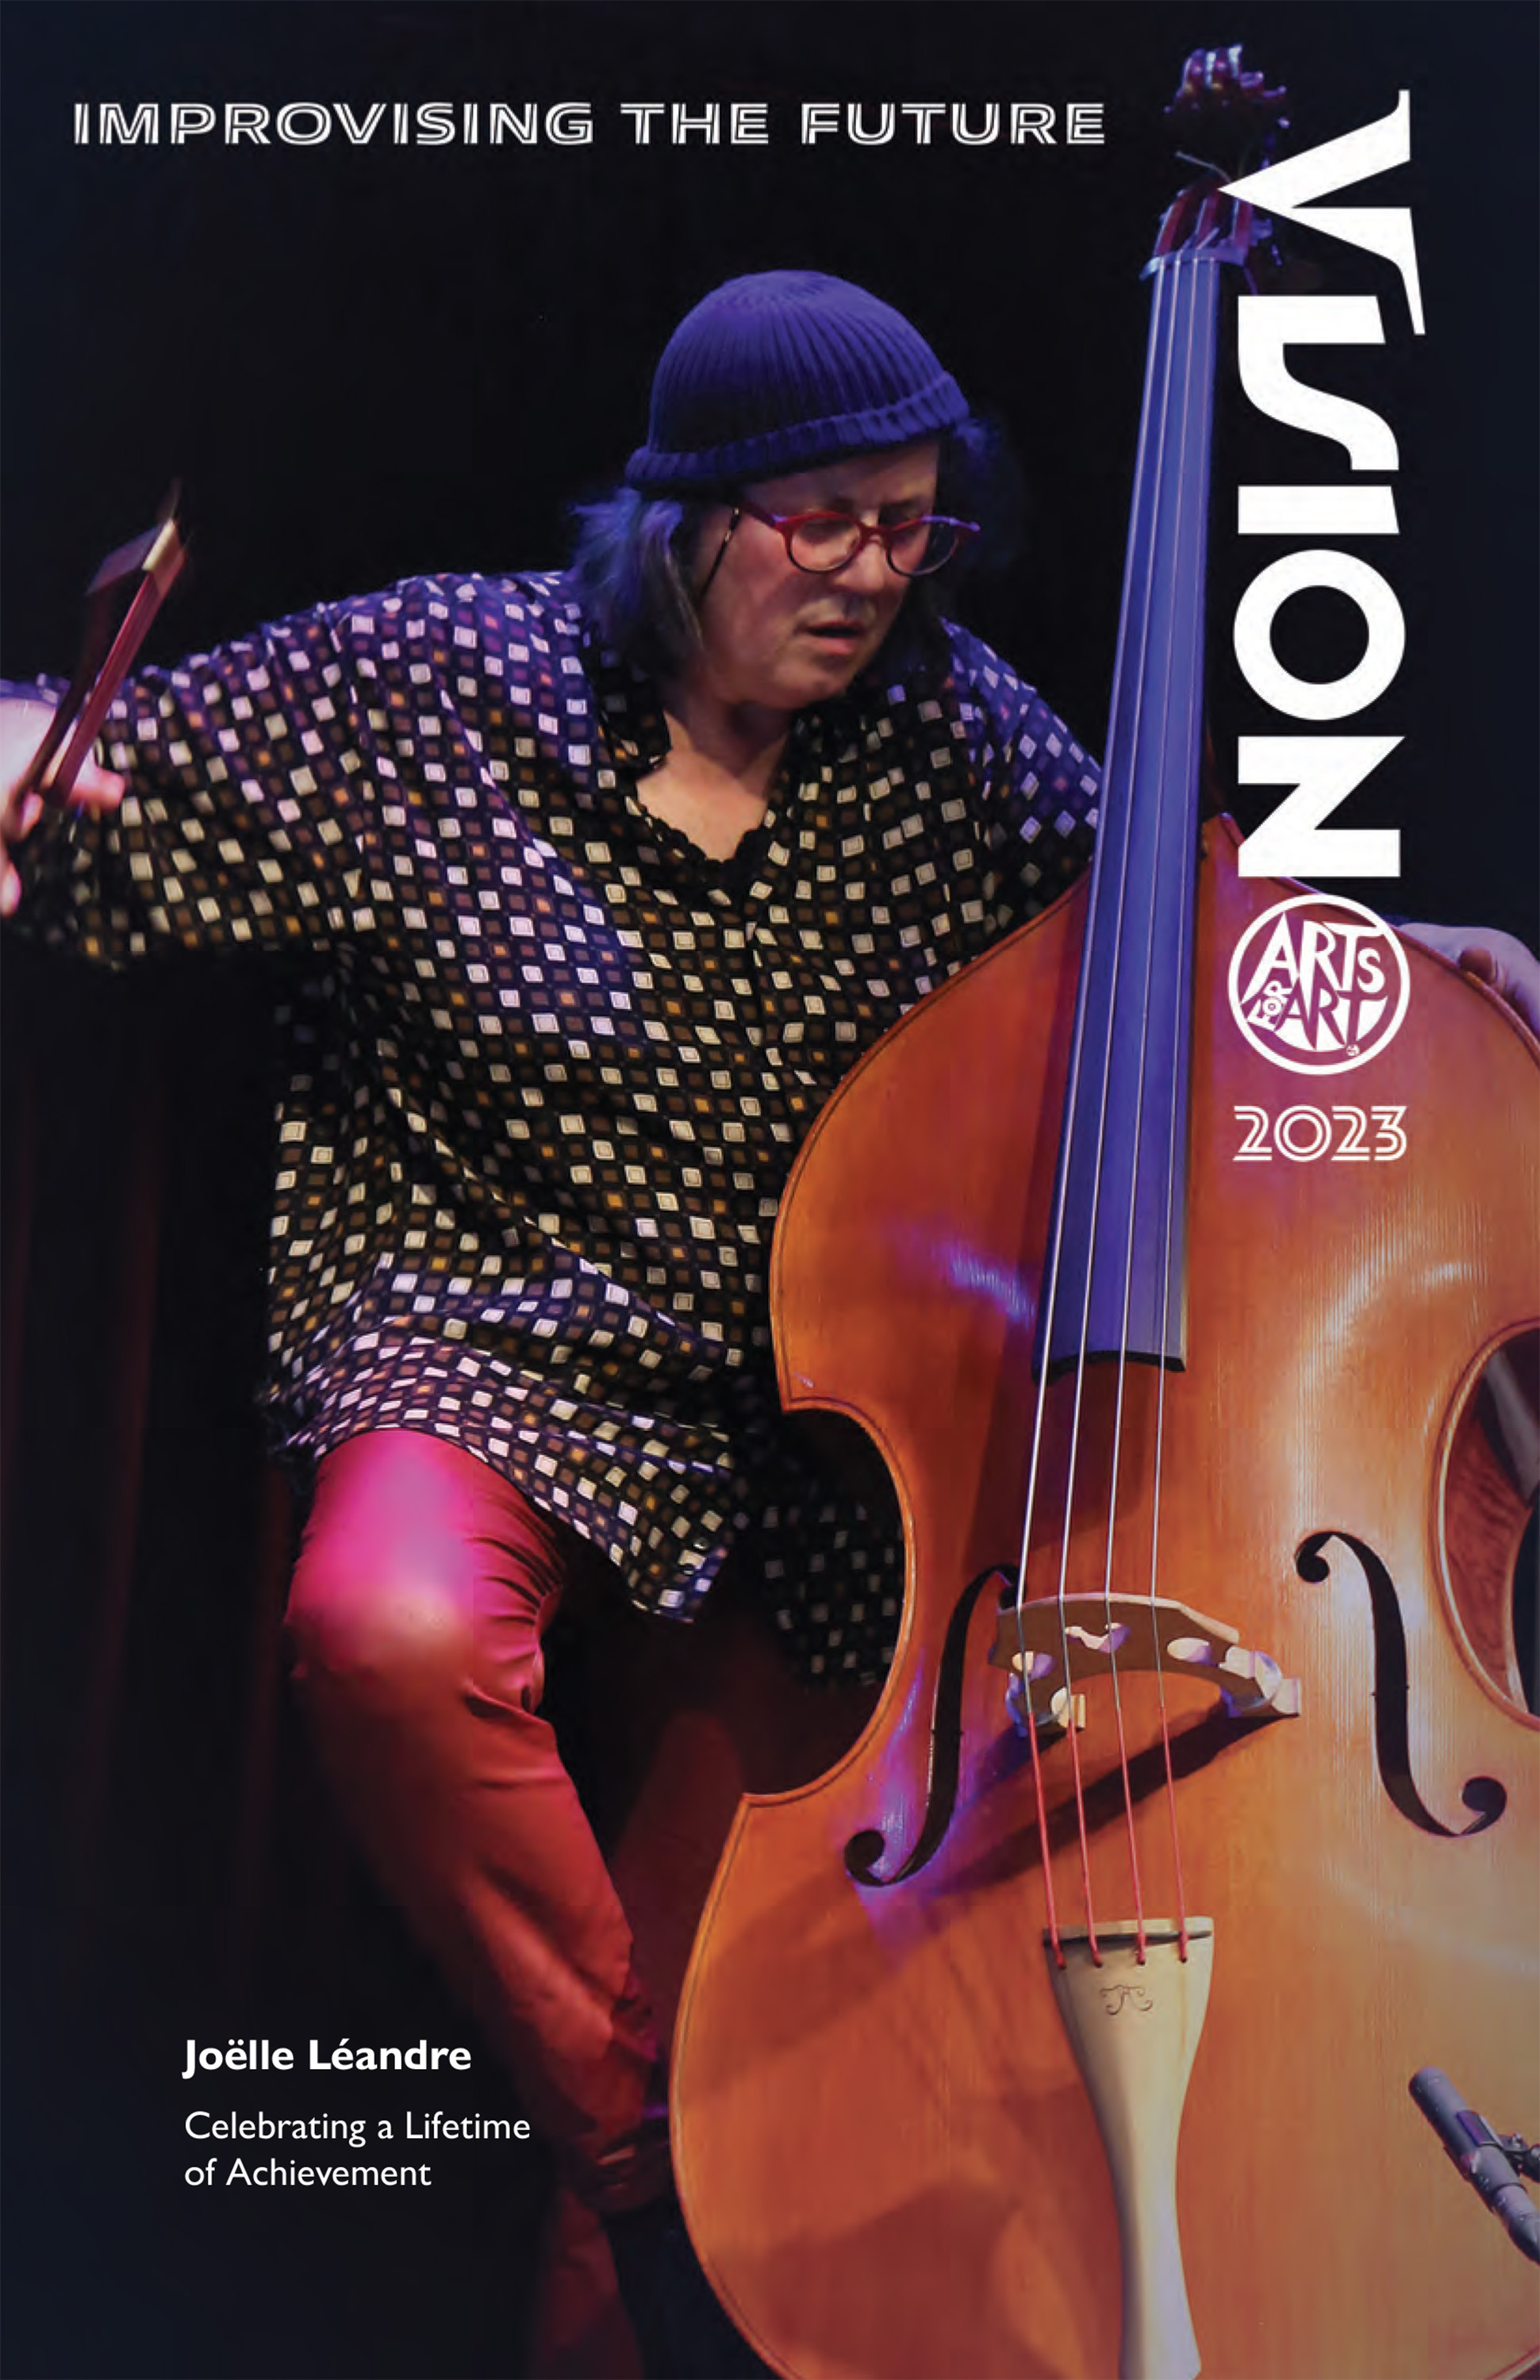 full color cover for the 2033 Vision Festival brochure featuring a picture of bassist Joelle Leandre and the Vision Festival logo